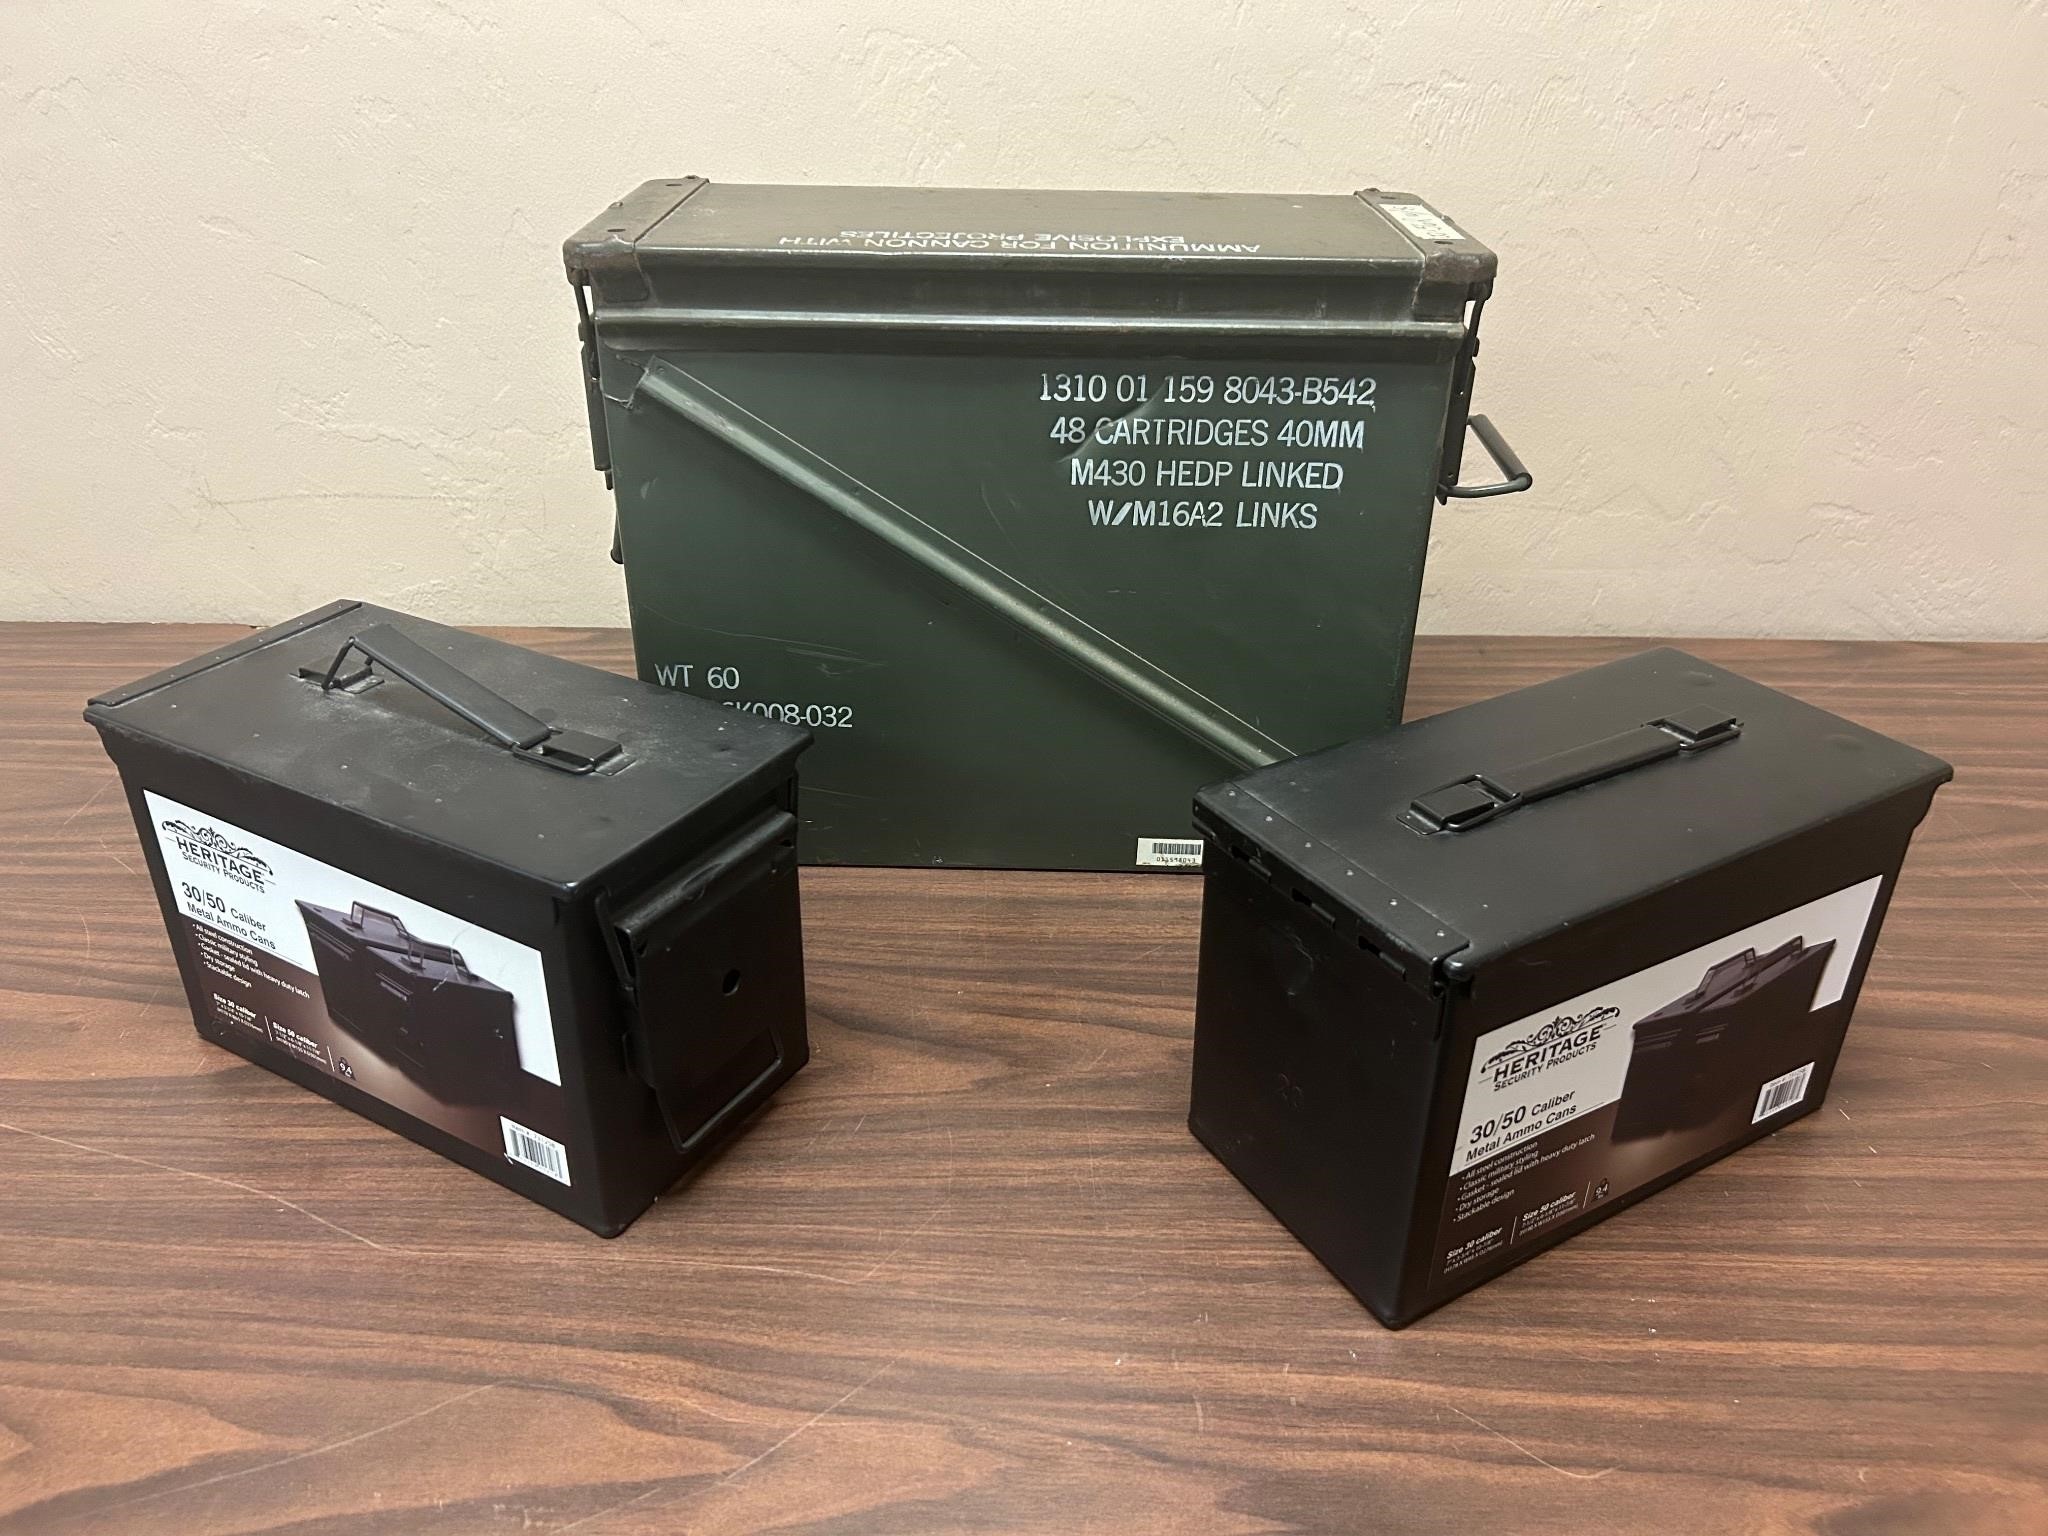 40MM Ammunition Box for Cannon Explosives + 2 Ammo